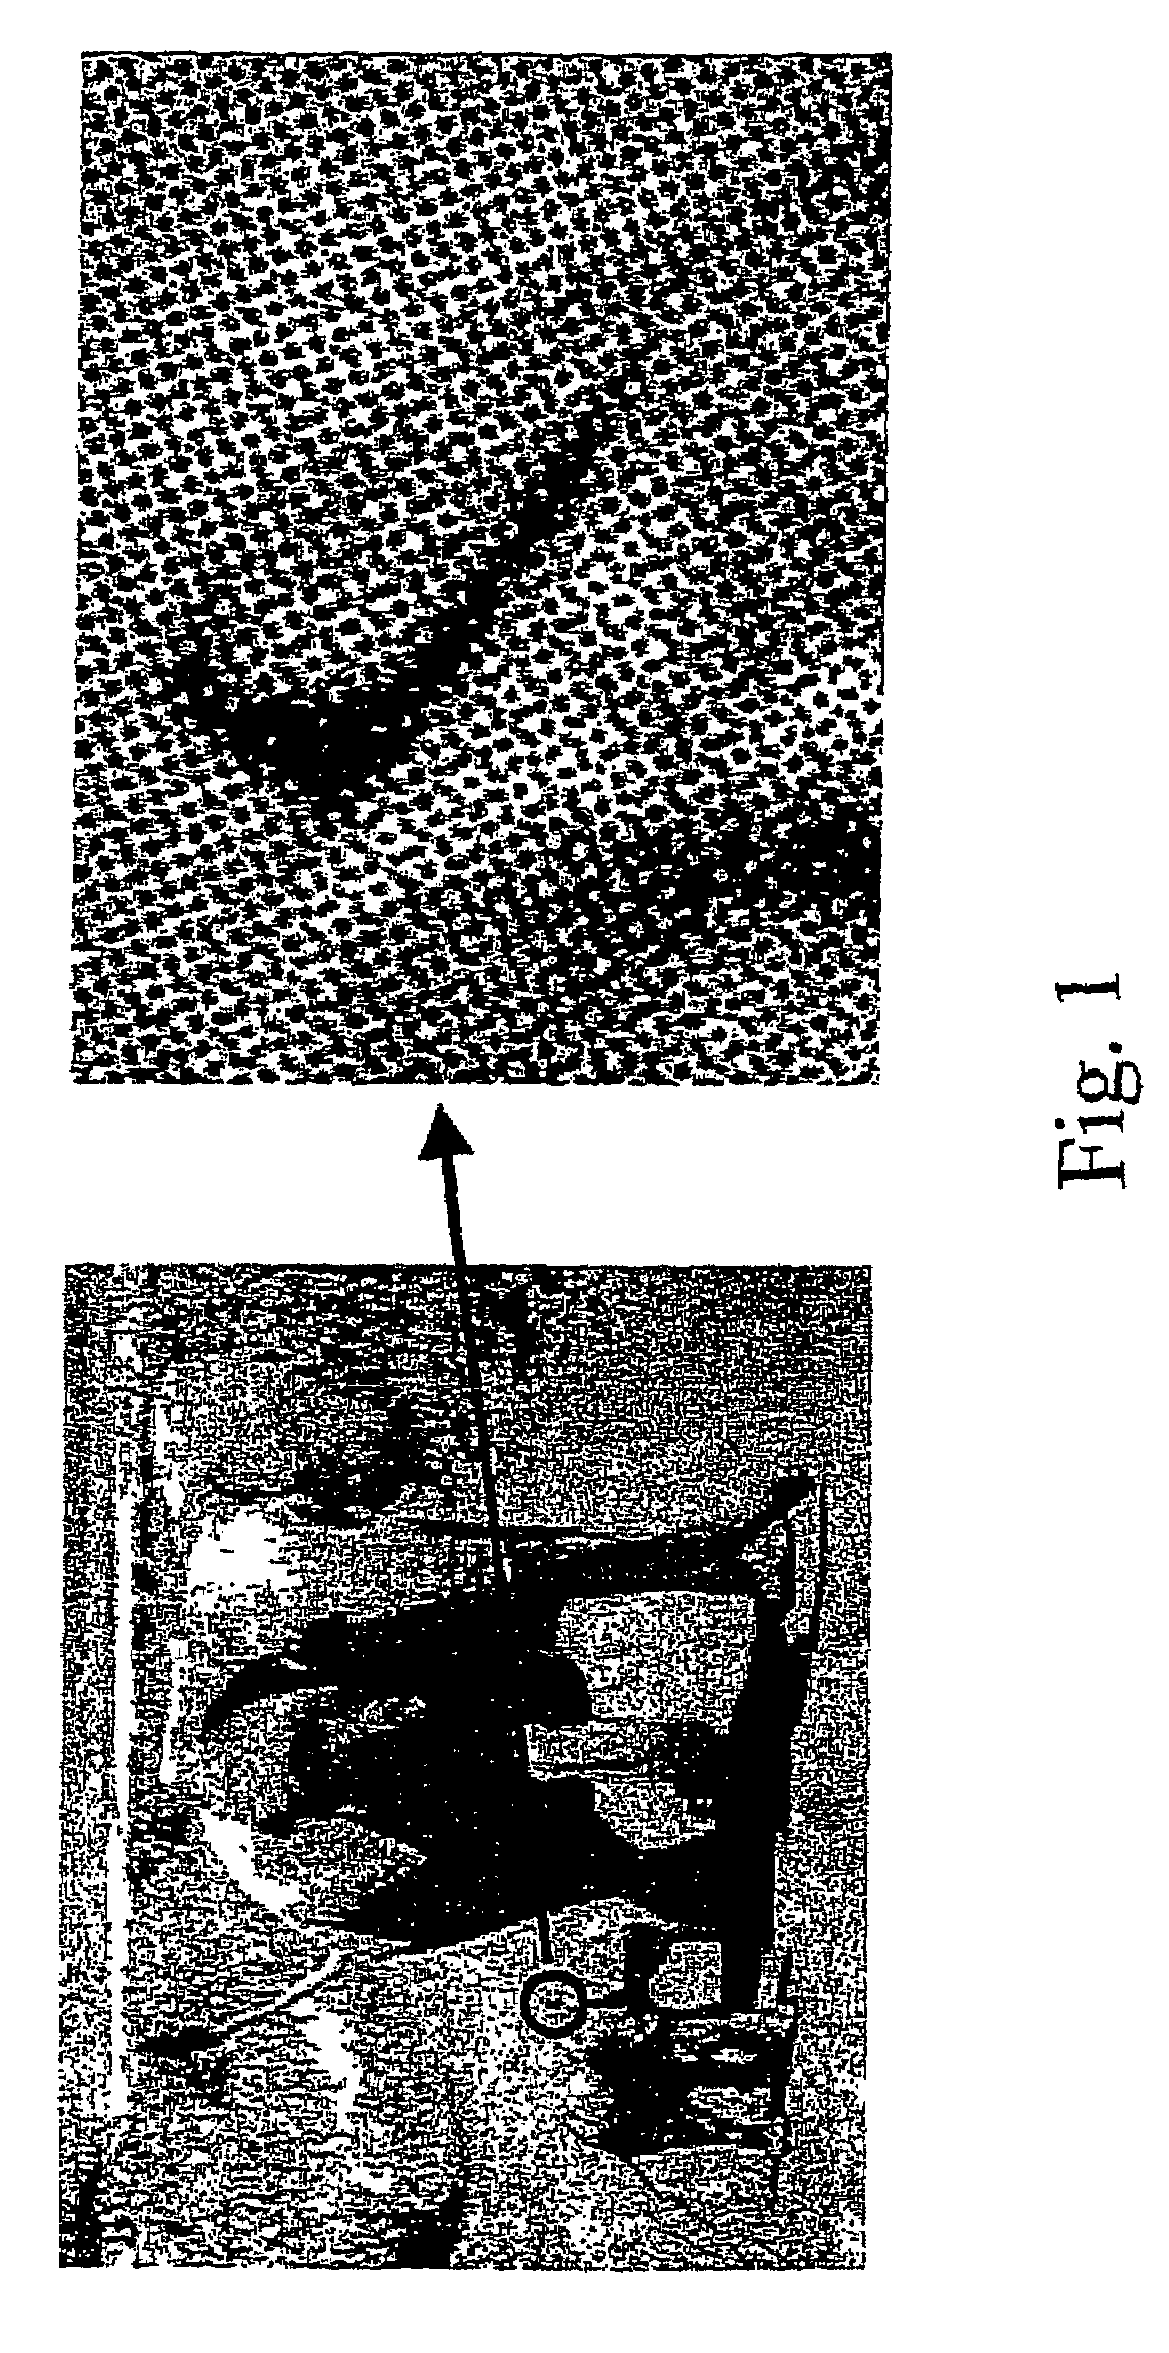 System and method for displaying an image